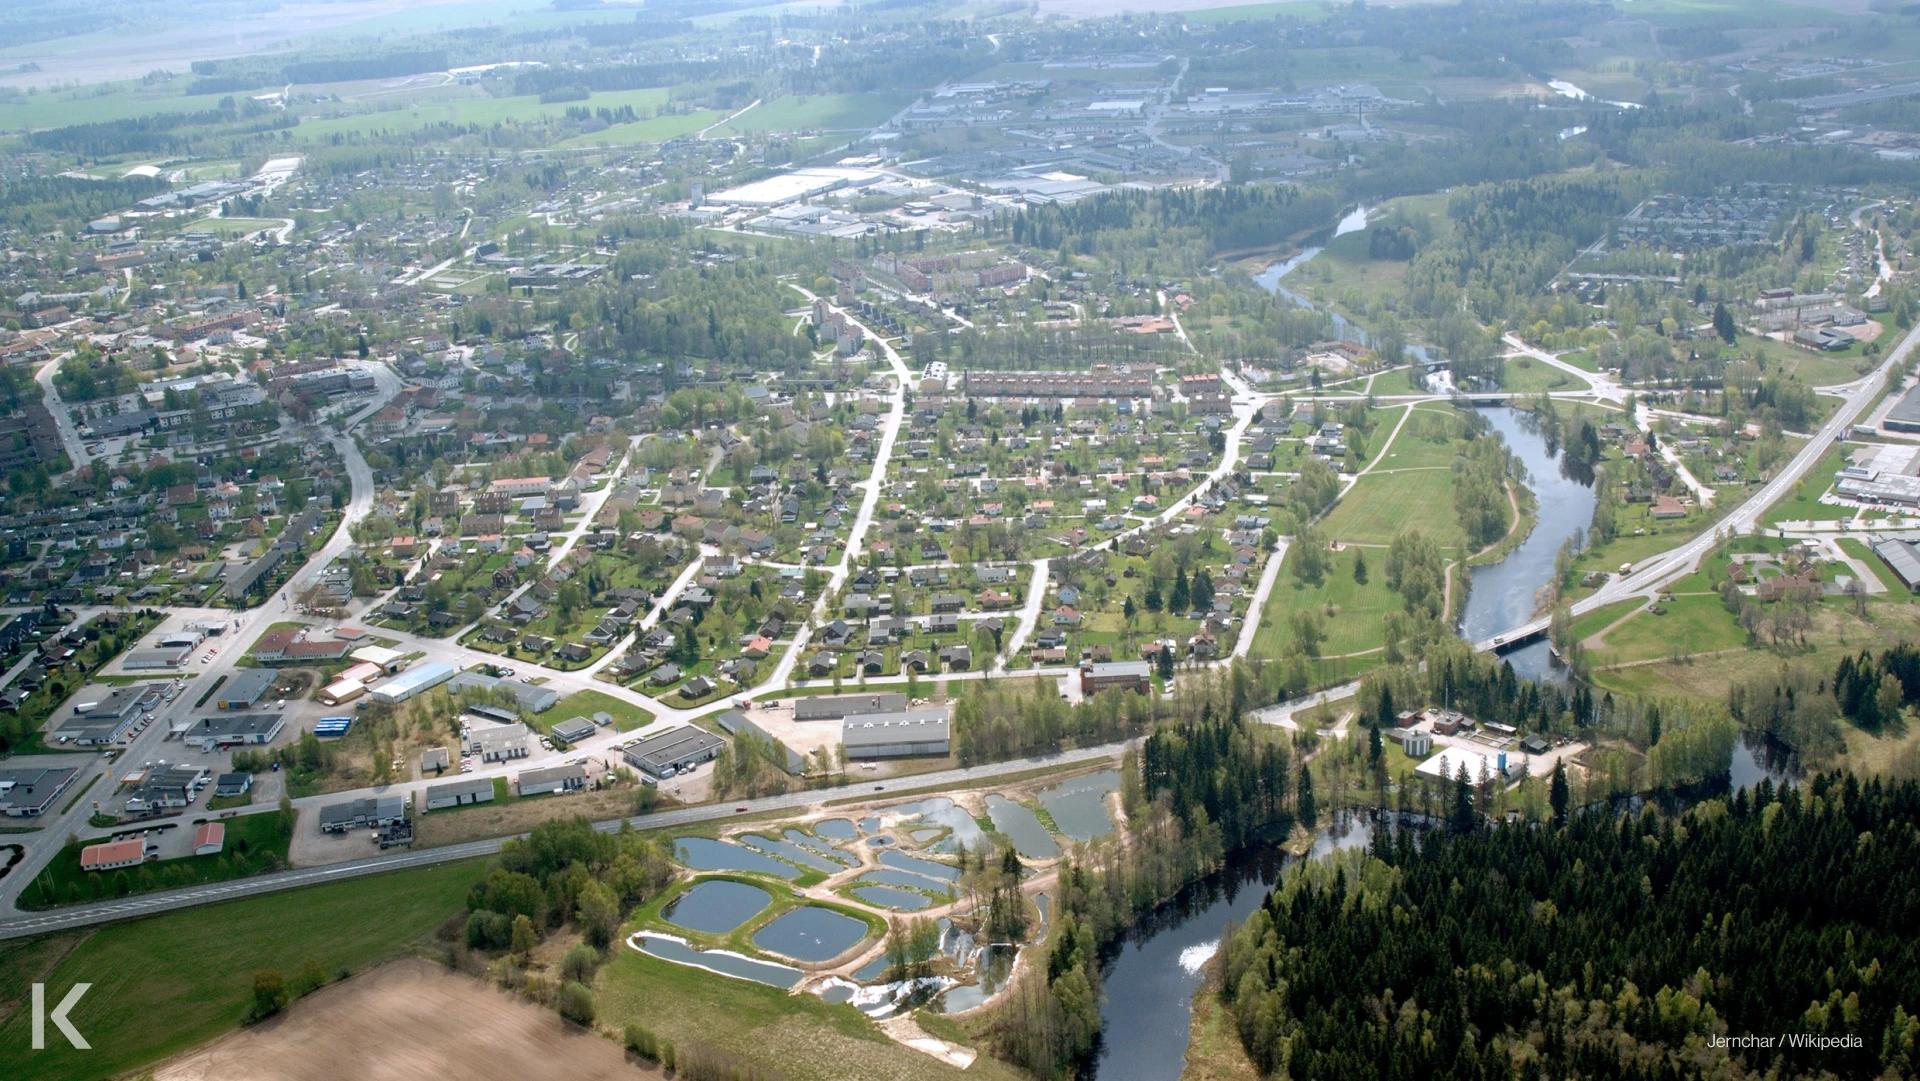 Aerial view of Tidan, an area managed by Tibrobyggen